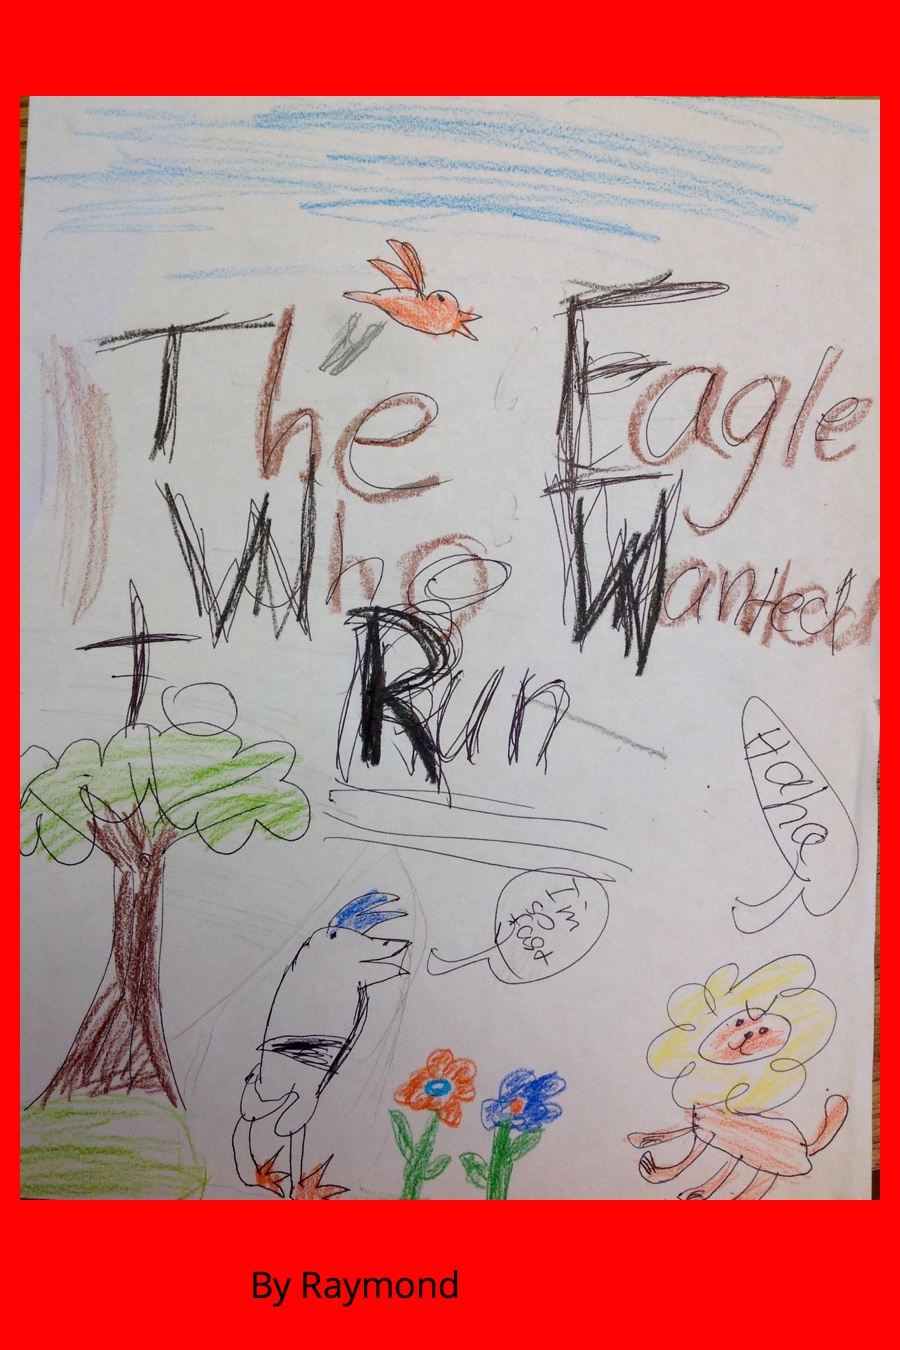 The Eagle Who Wanted to Run by Raymond L